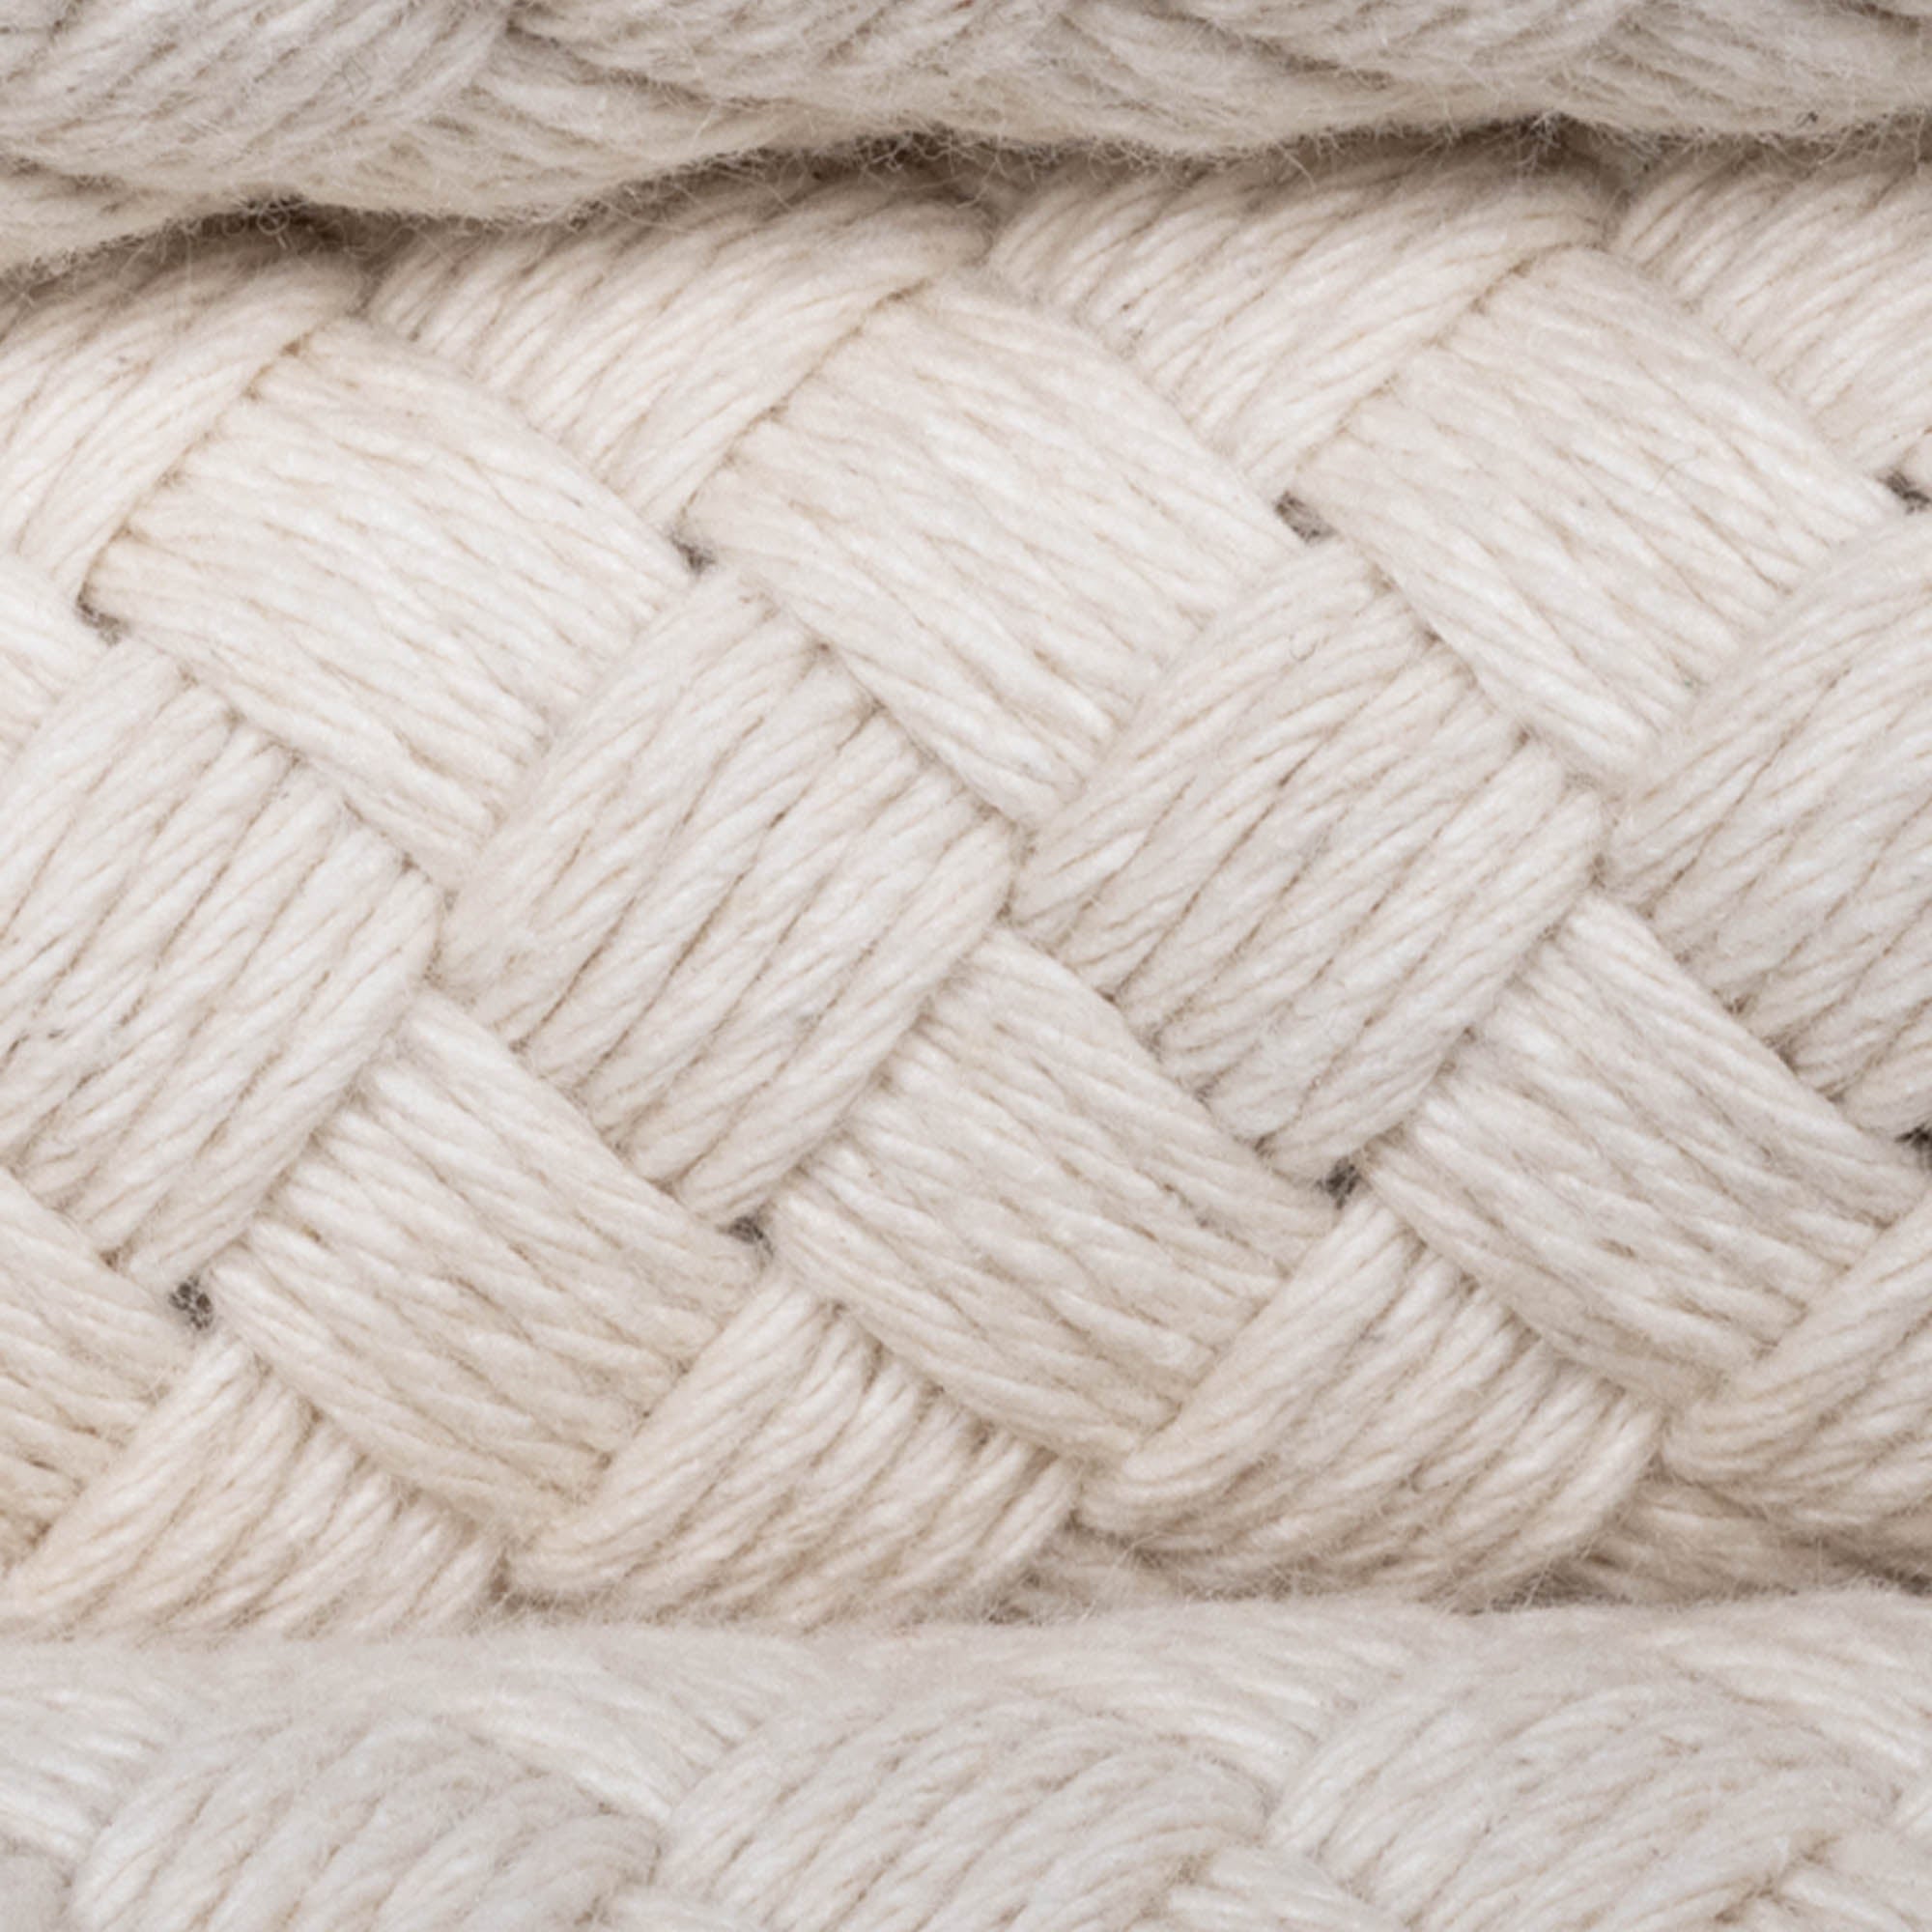 Extreme close up rope texture